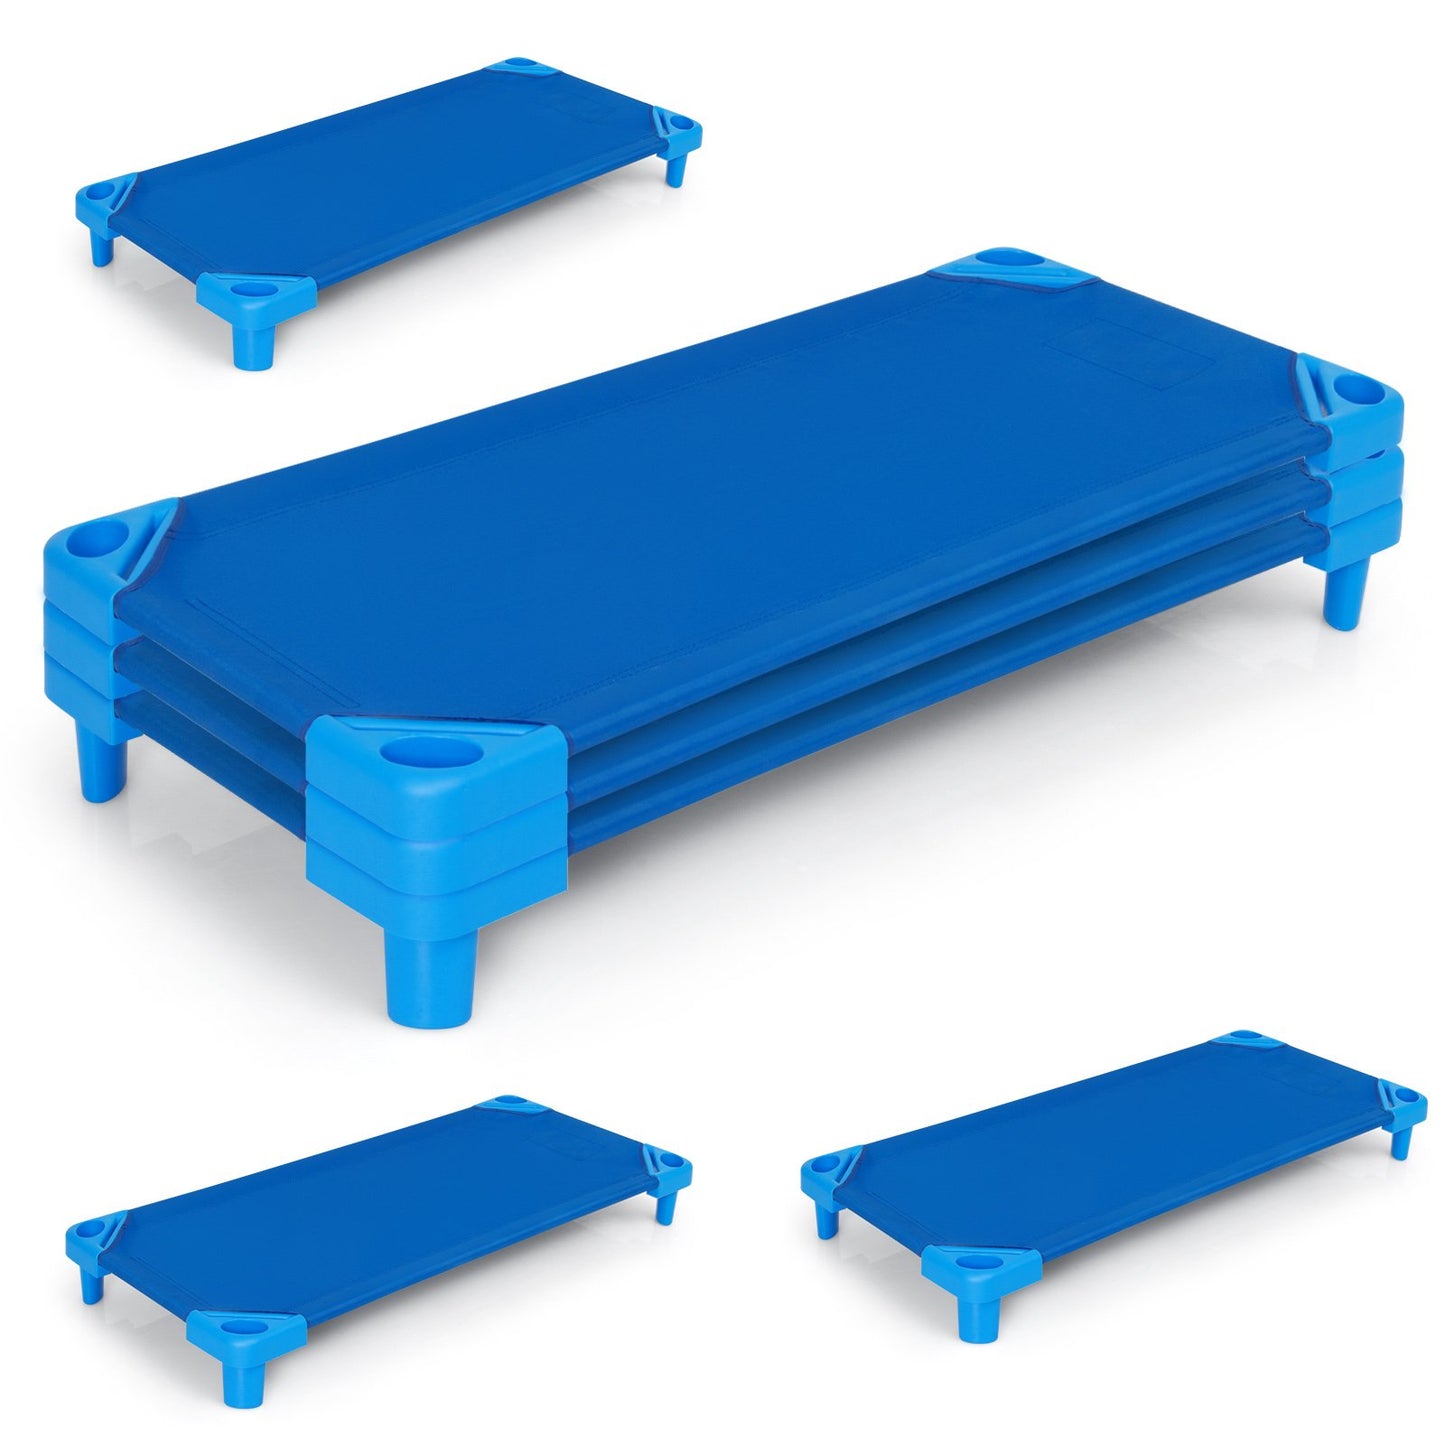 52 Inch x 23 Inch Pack of 6 Kids Stackable Daycare Rest Mat, Blue